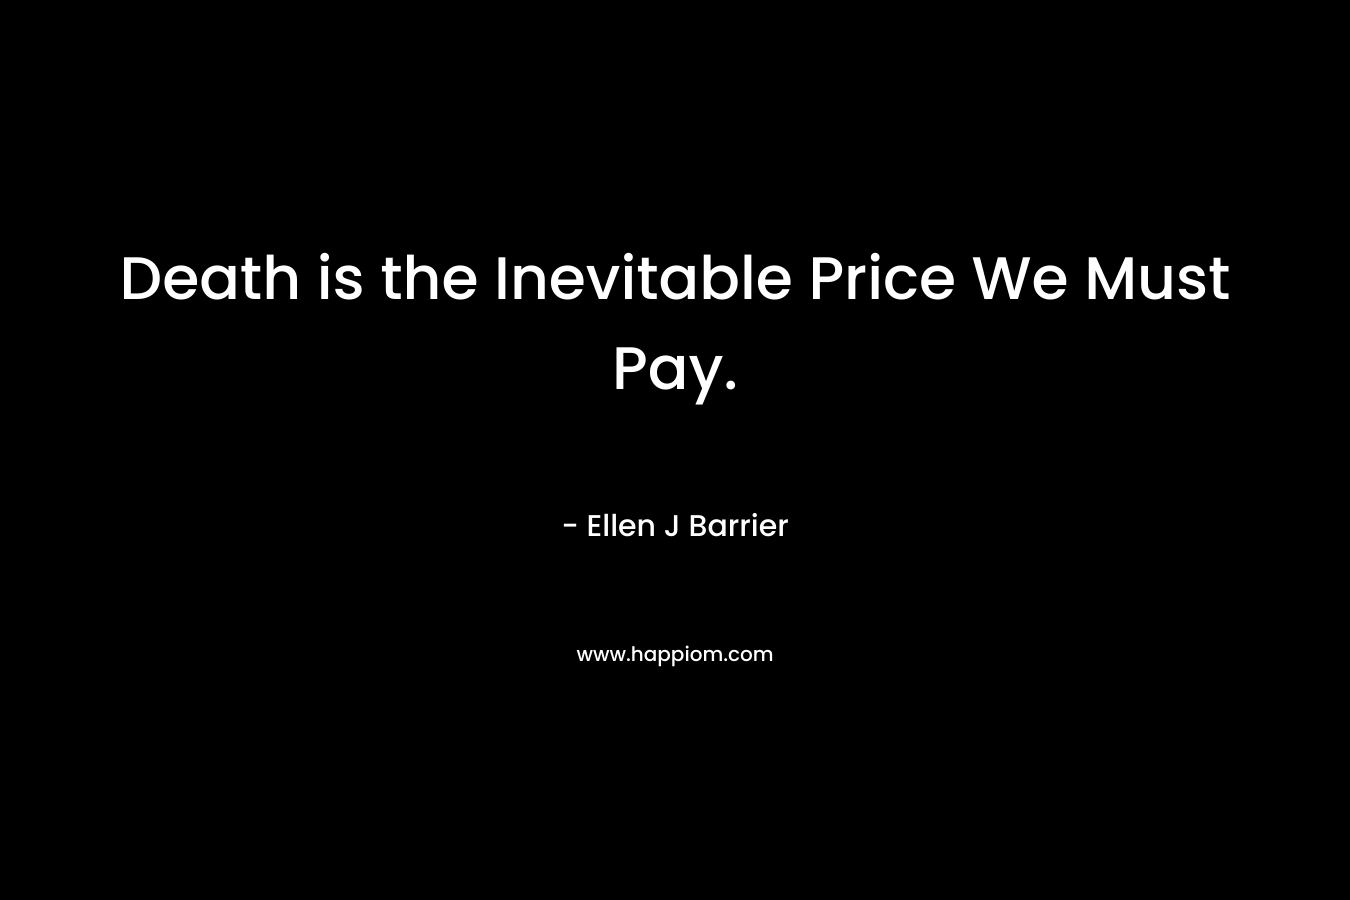 Death is the Inevitable Price We Must Pay.